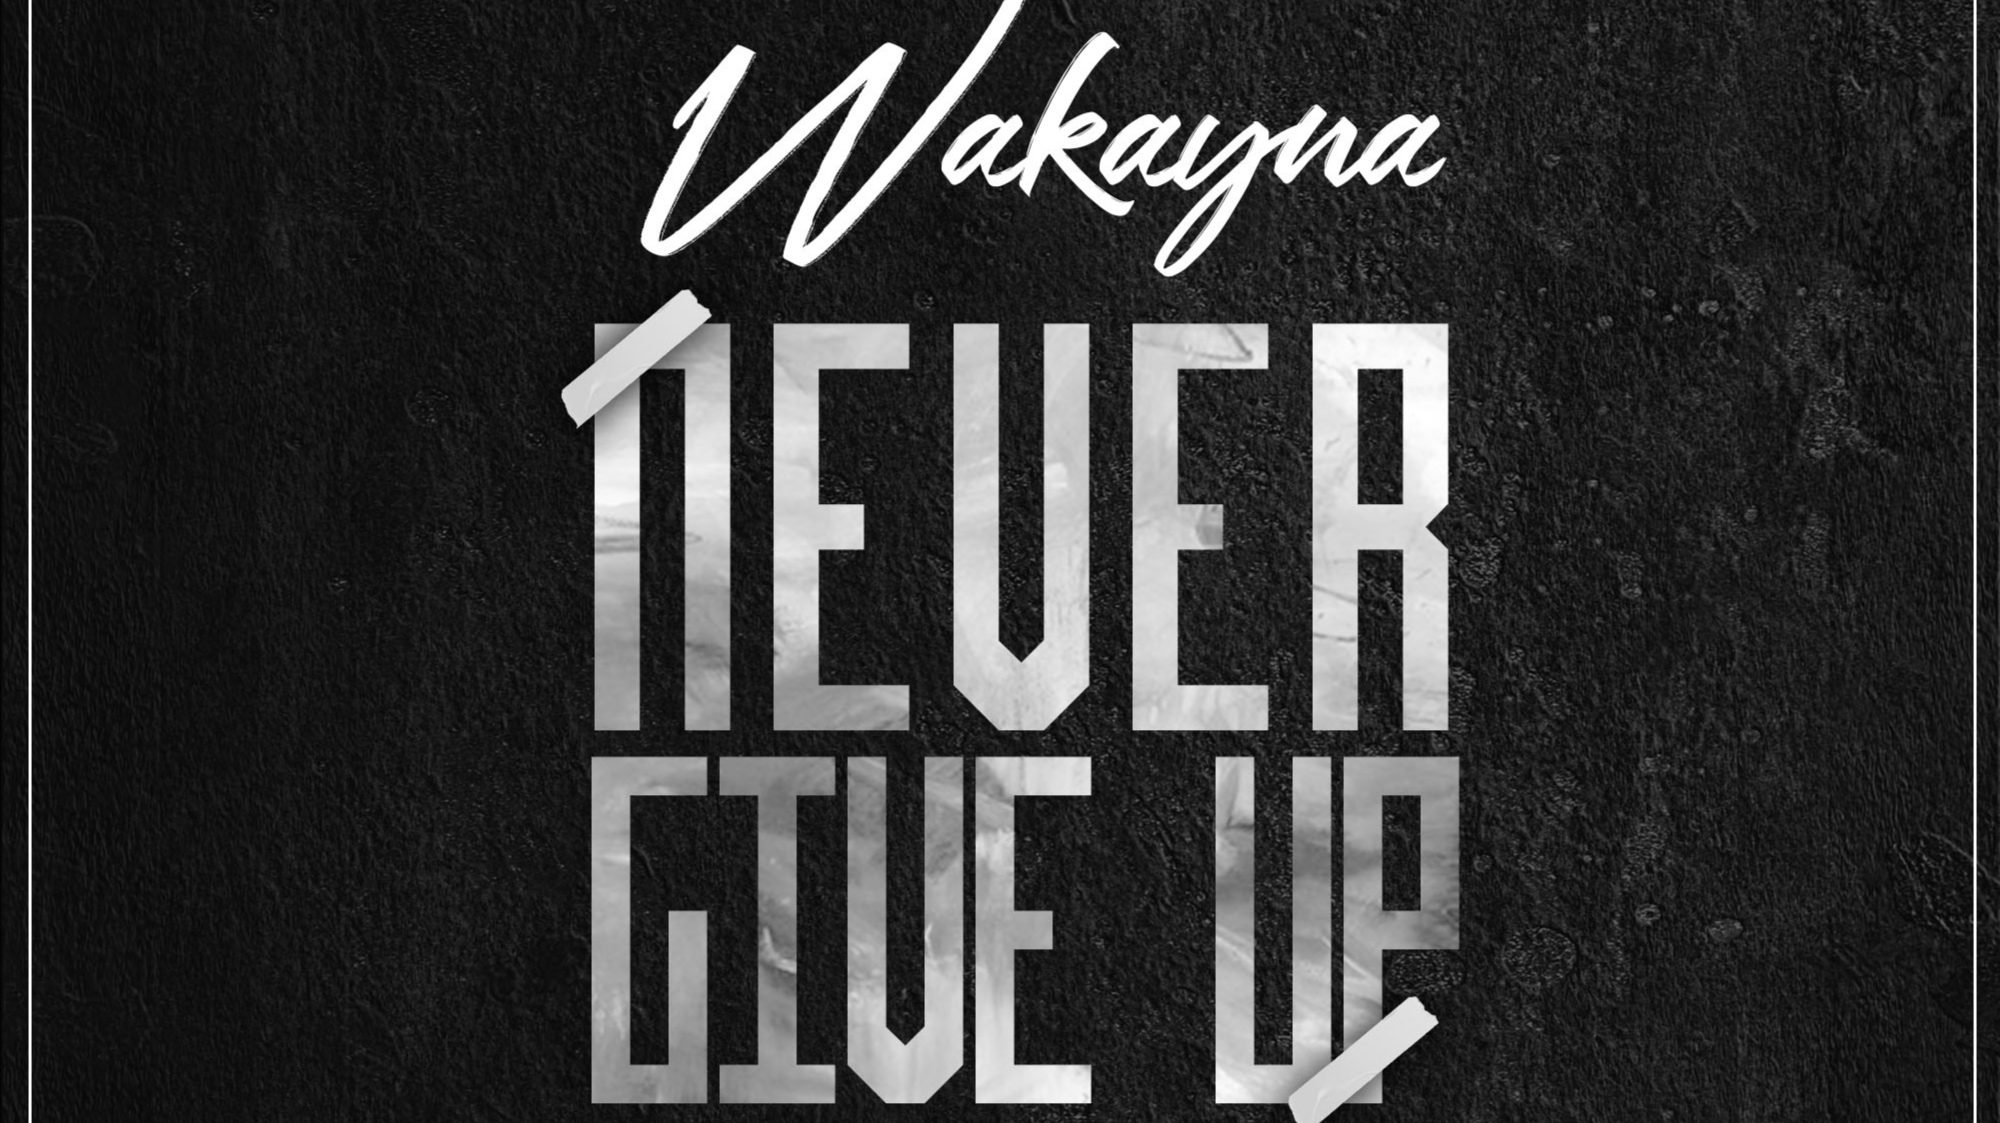 New Music + Video: Wakayna – Never Give Up